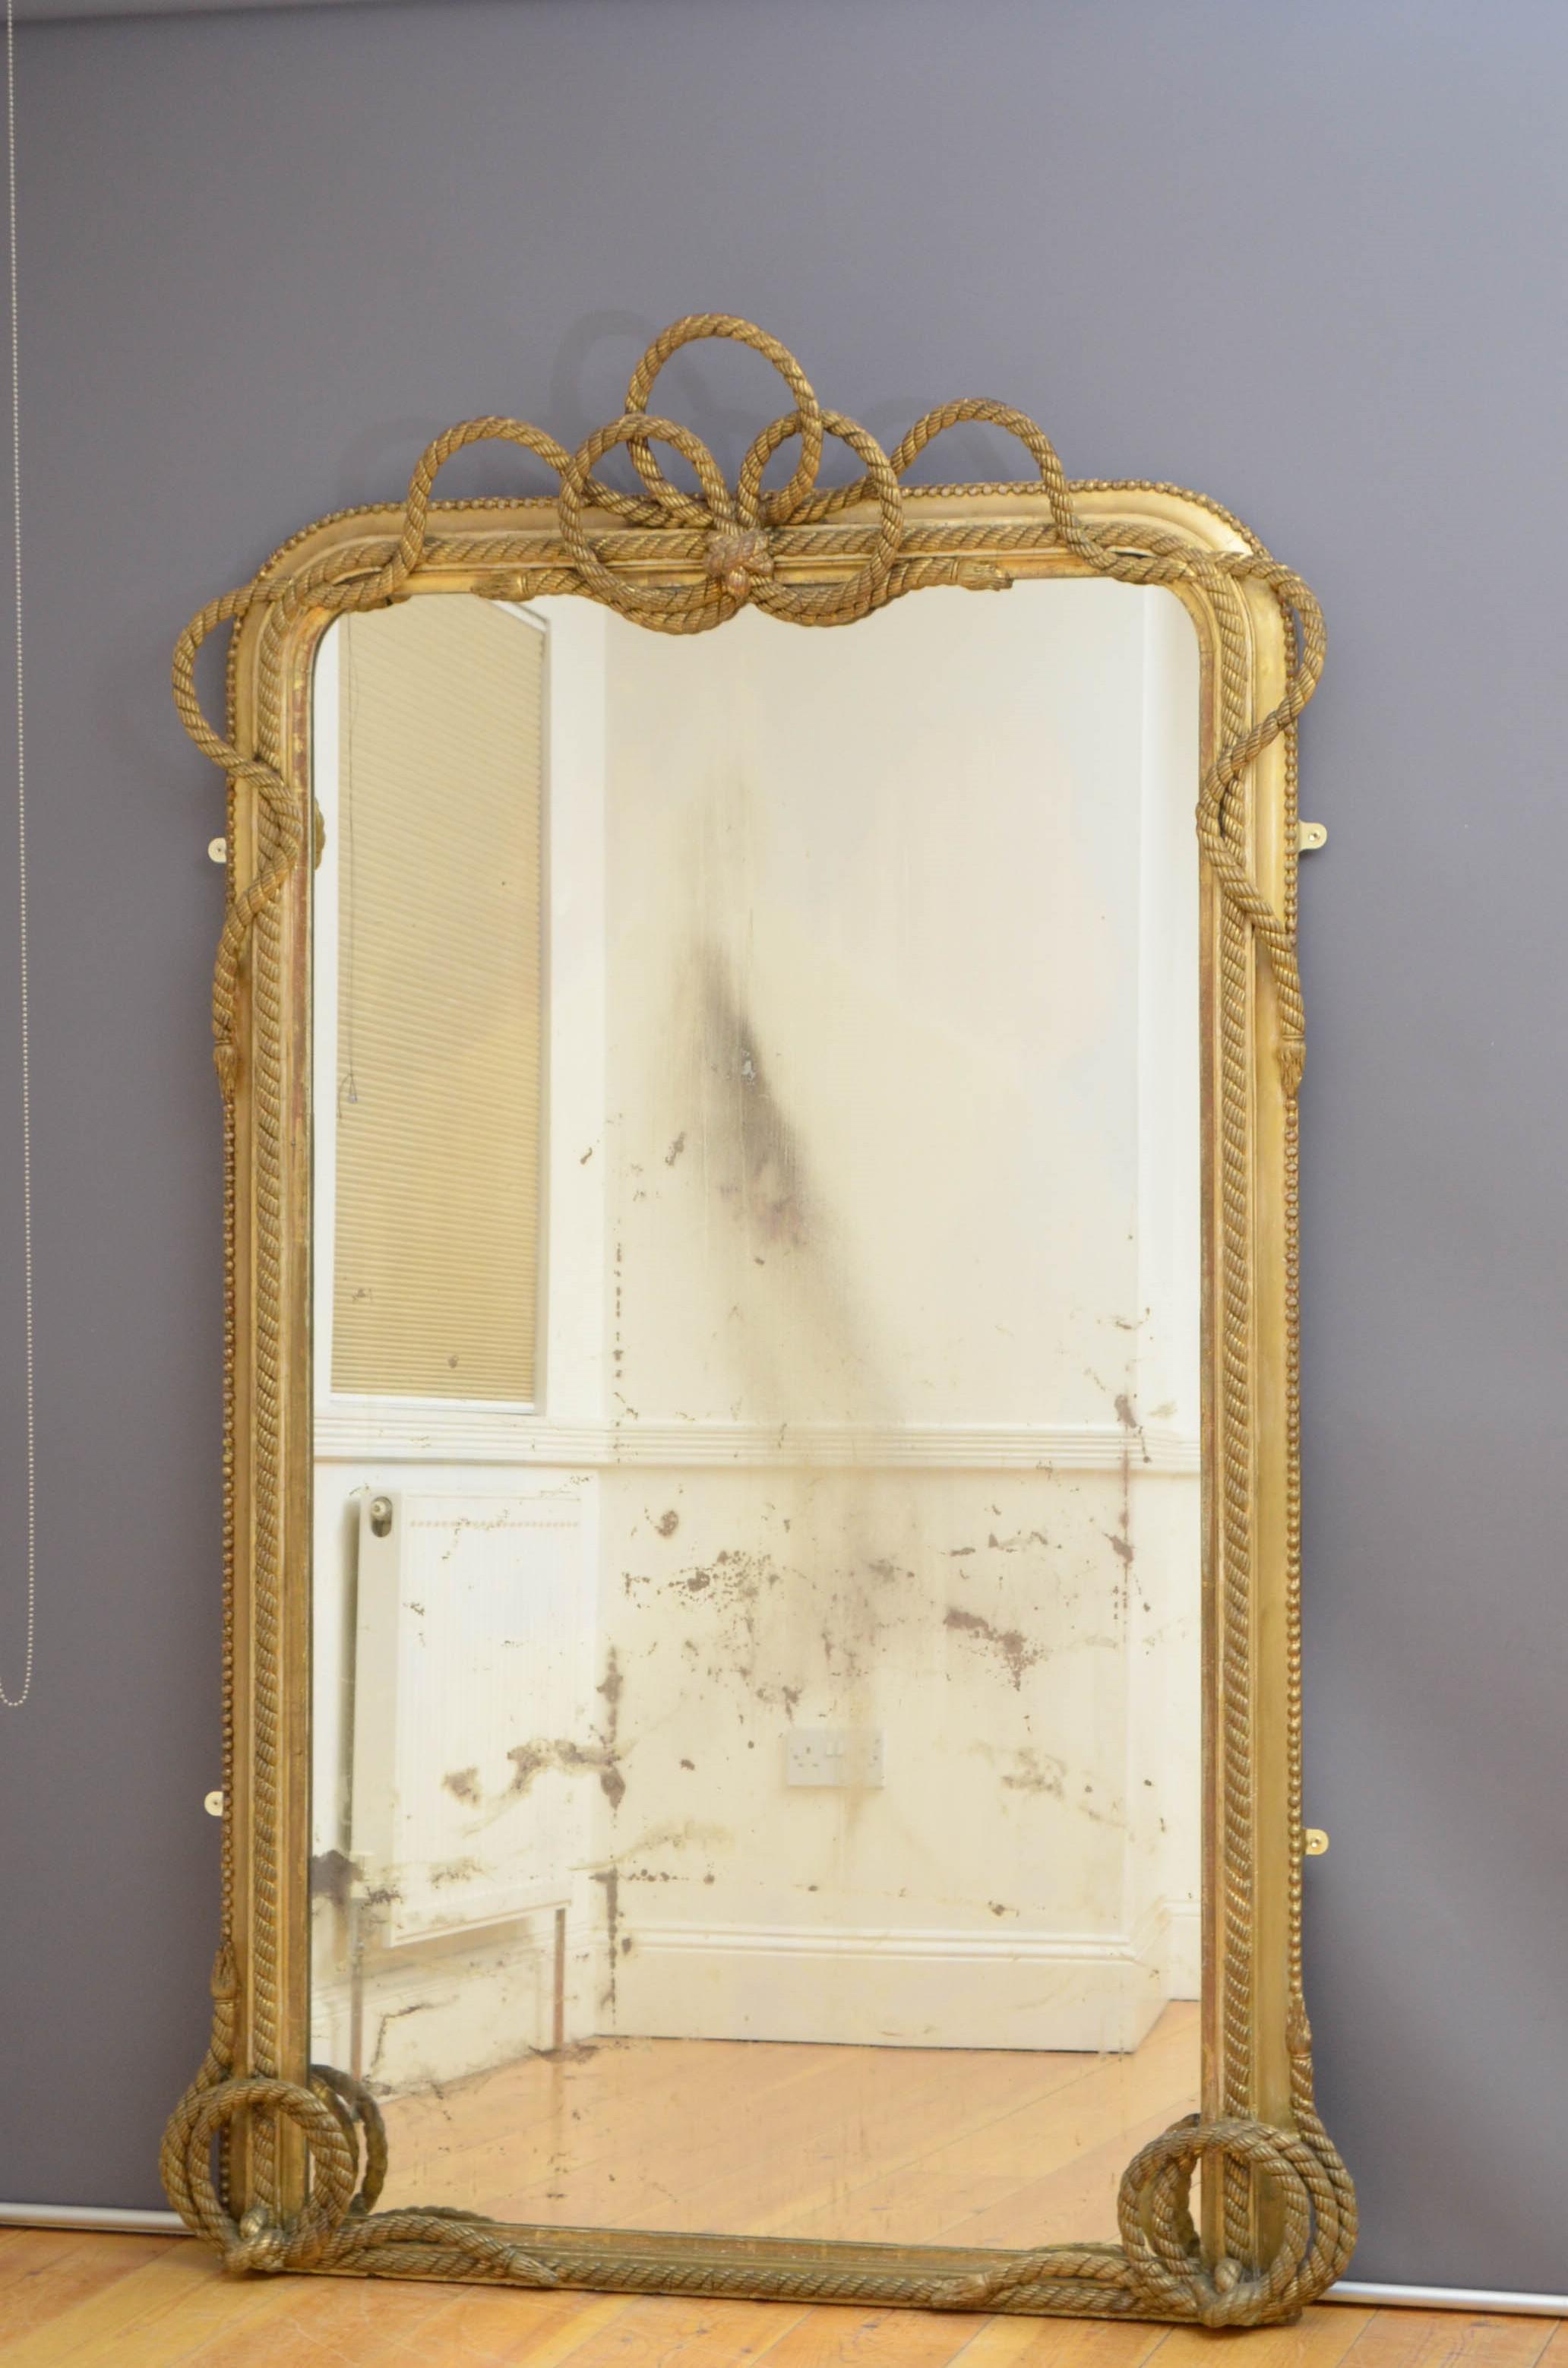 Sn5029, a large Victorian 19th century full length mirror, having original glass with age marks and foxing in moulded, beaded and gilded frame with rope scrolls to the base and rope centre crest decoration. This antique mirror retains its original